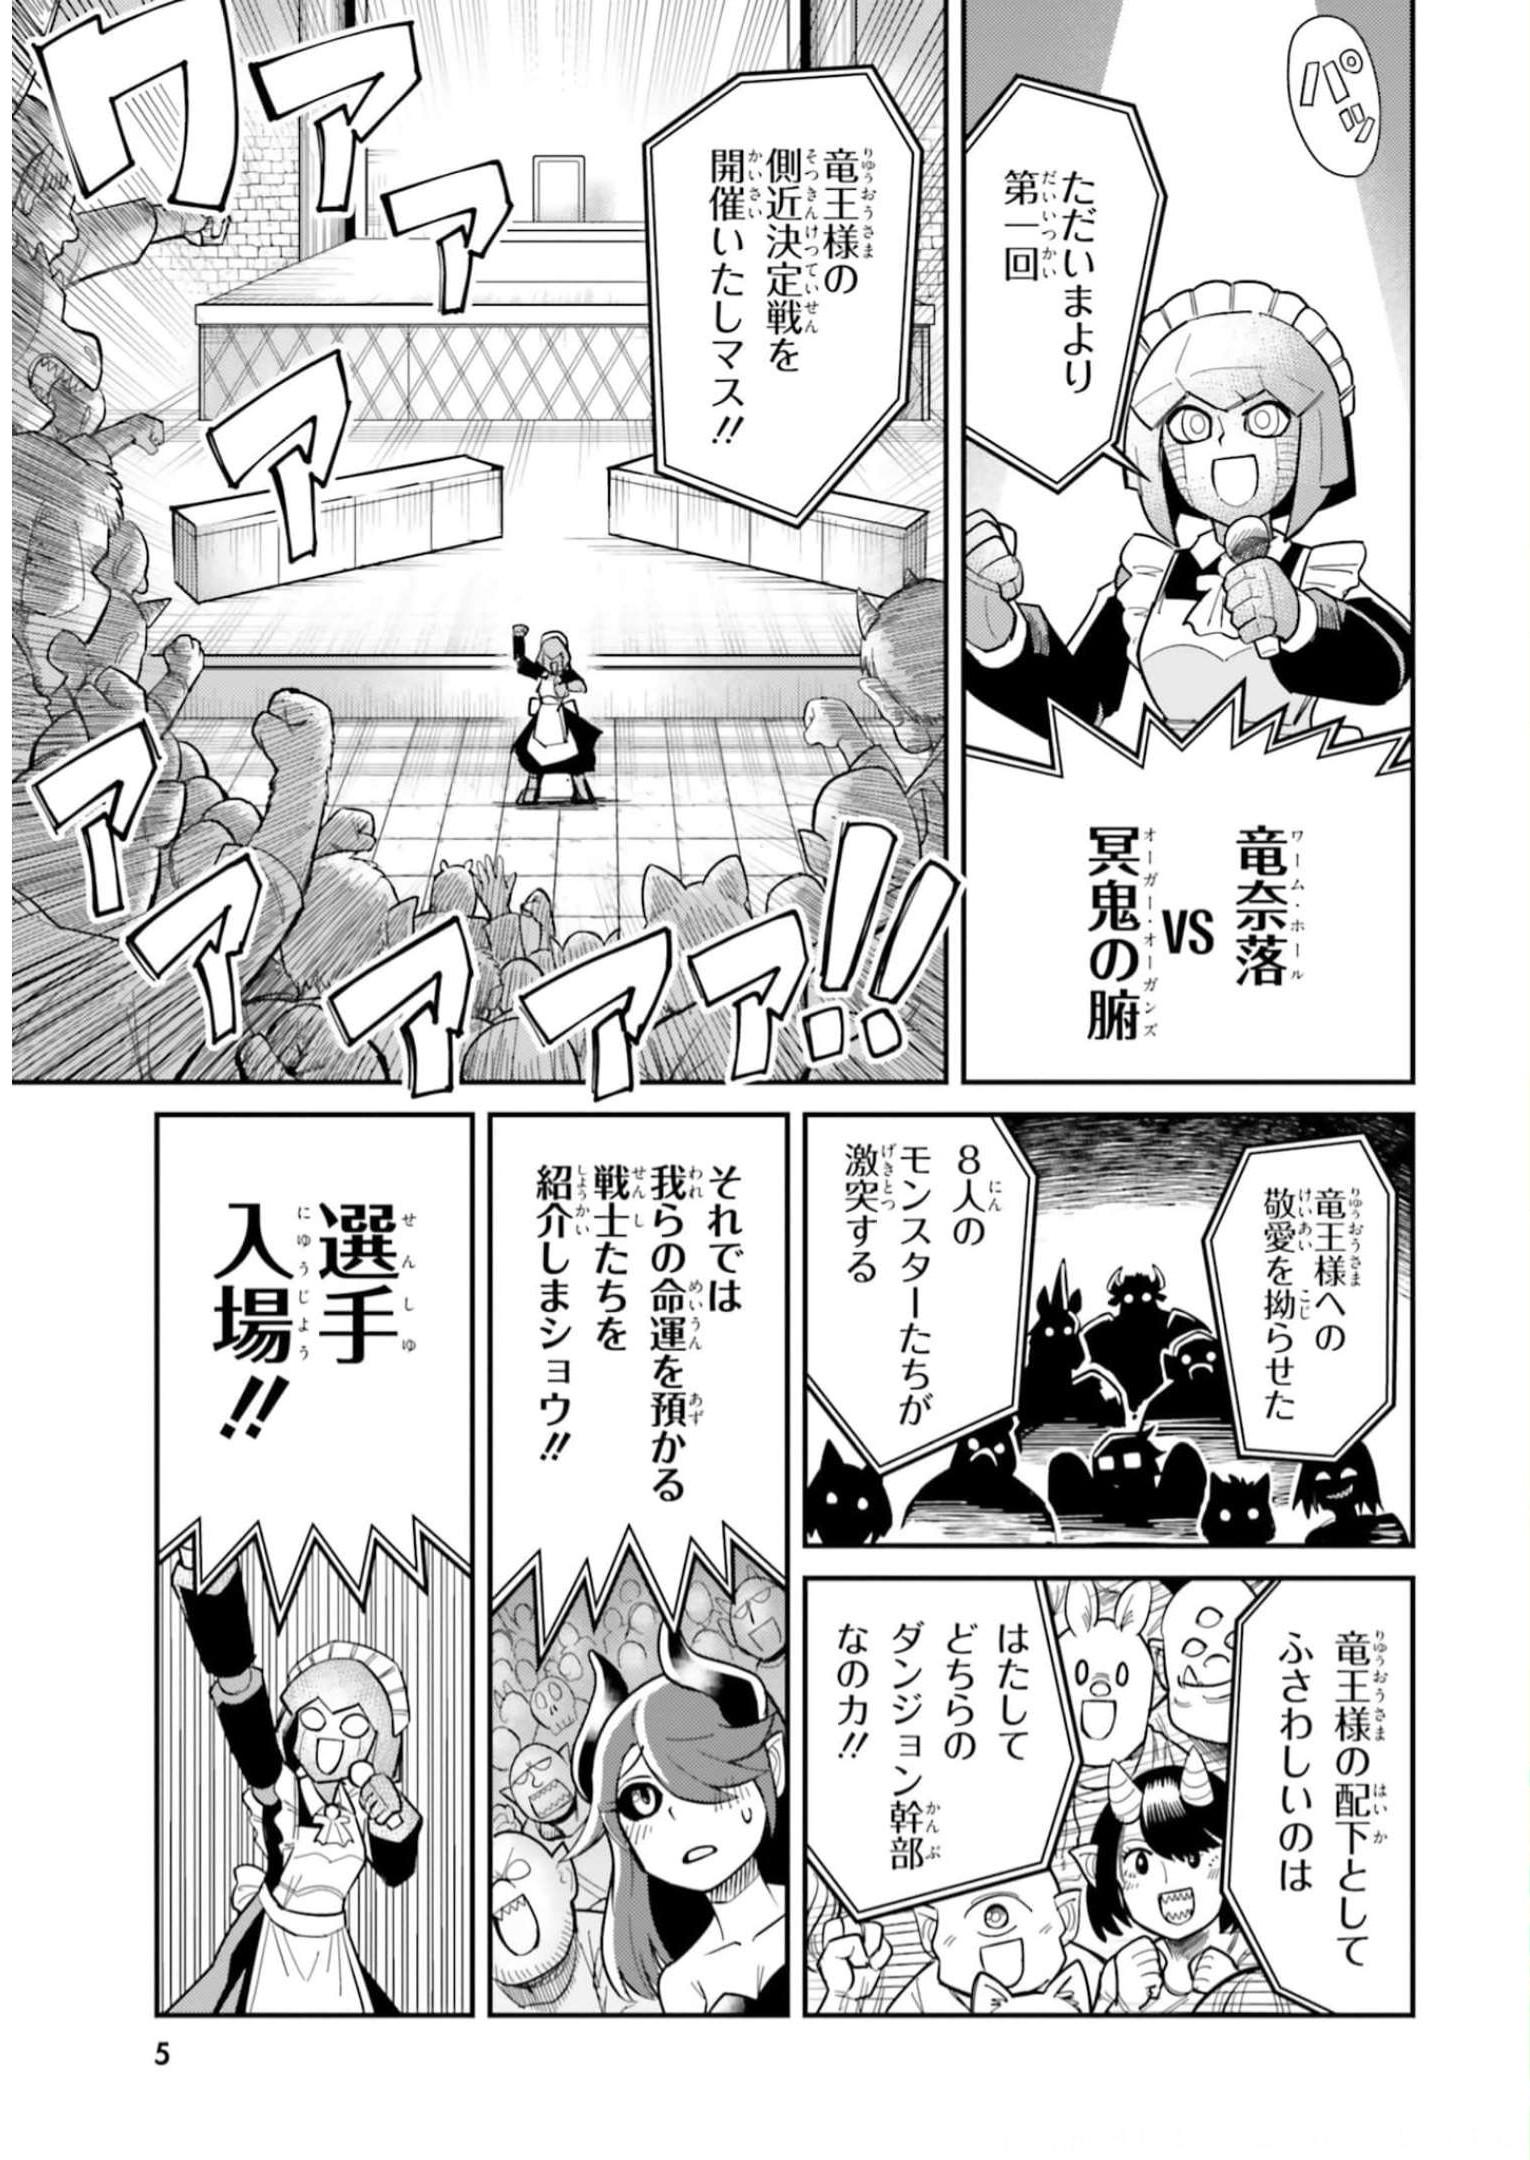 Dungeon Friends Forever Dungeon's Childhood Friend ダンジョンの幼なじみ 第19話 - Page 6